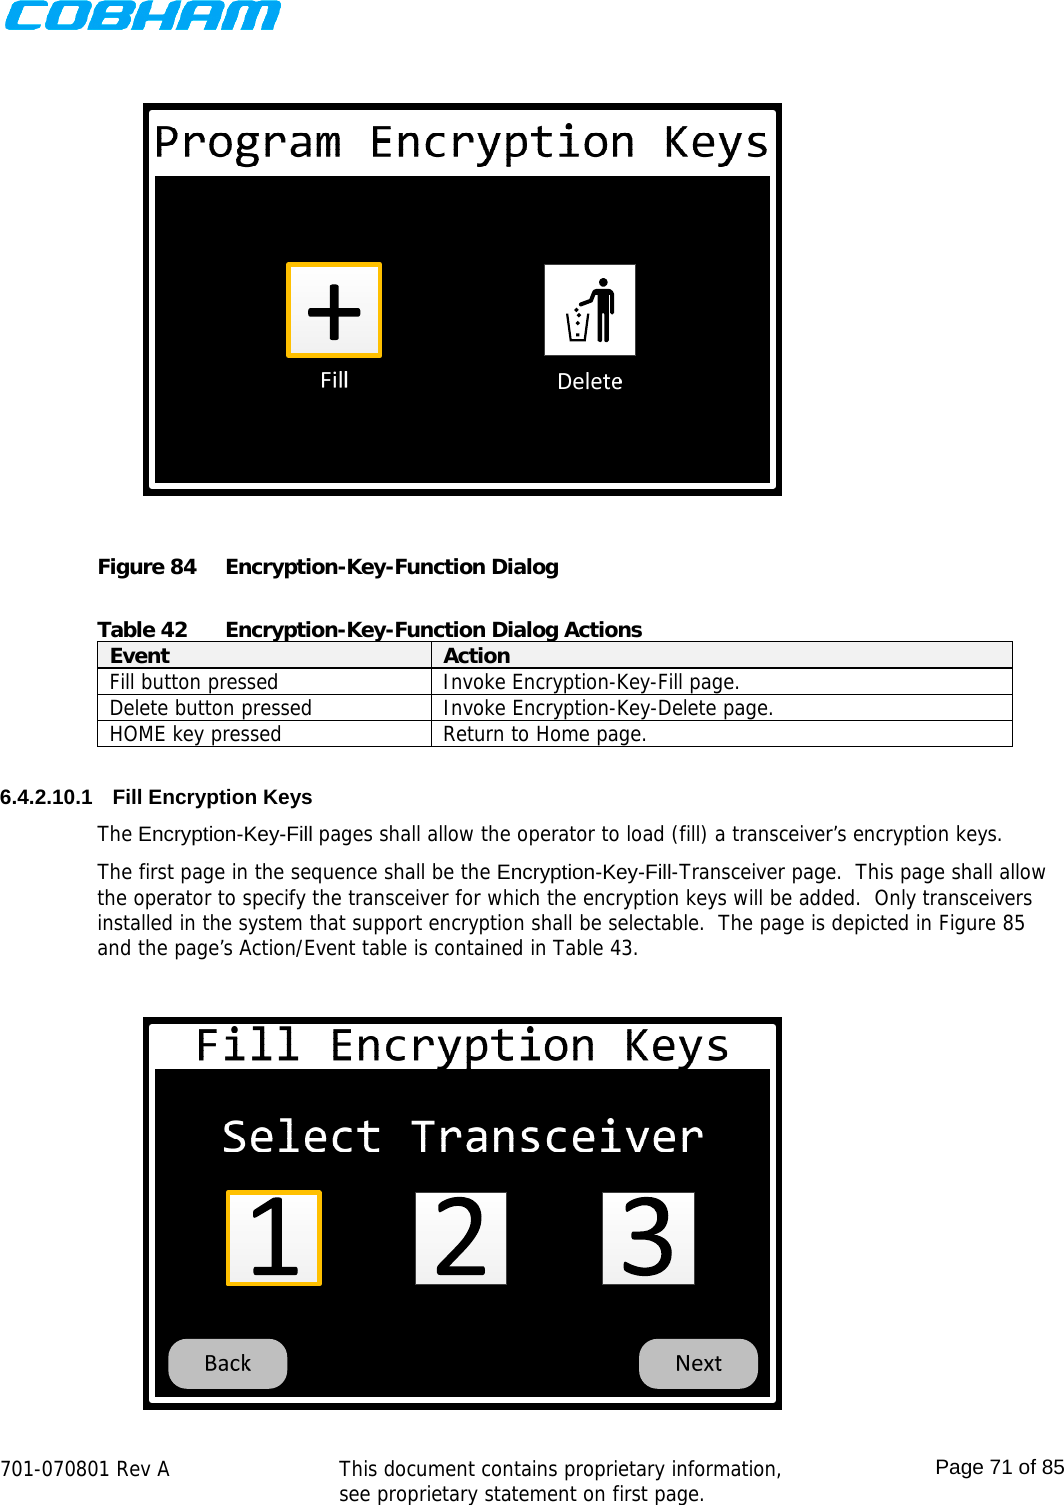    701-070801 Rev A   This document contains proprietary information, see proprietary statement on first page.  Page 71 of 85   Figure 84  Encryption-Key-Function Dialog  Table 42  Encryption-Key-Function Dialog Actions Event  Action Fill button pressed  Invoke Encryption-Key-Fill page. Delete button pressed  Invoke Encryption-Key-Delete page. HOME key pressed  Return to Home page.  6.4.2.10.1  Fill Encryption Keys The Encryption-Key-Fill pages shall allow the operator to load (fill) a transceiver’s encryption keys.  The first page in the sequence shall be the Encryption-Key-Fill-Transceiver page.  This page shall allow the operator to specify the transceiver for which the encryption keys will be added.  Only transceivers installed in the system that support encryption shall be selectable.  The page is depicted in Figure 85 and the page’s Action/Event table is contained in Table 43.  